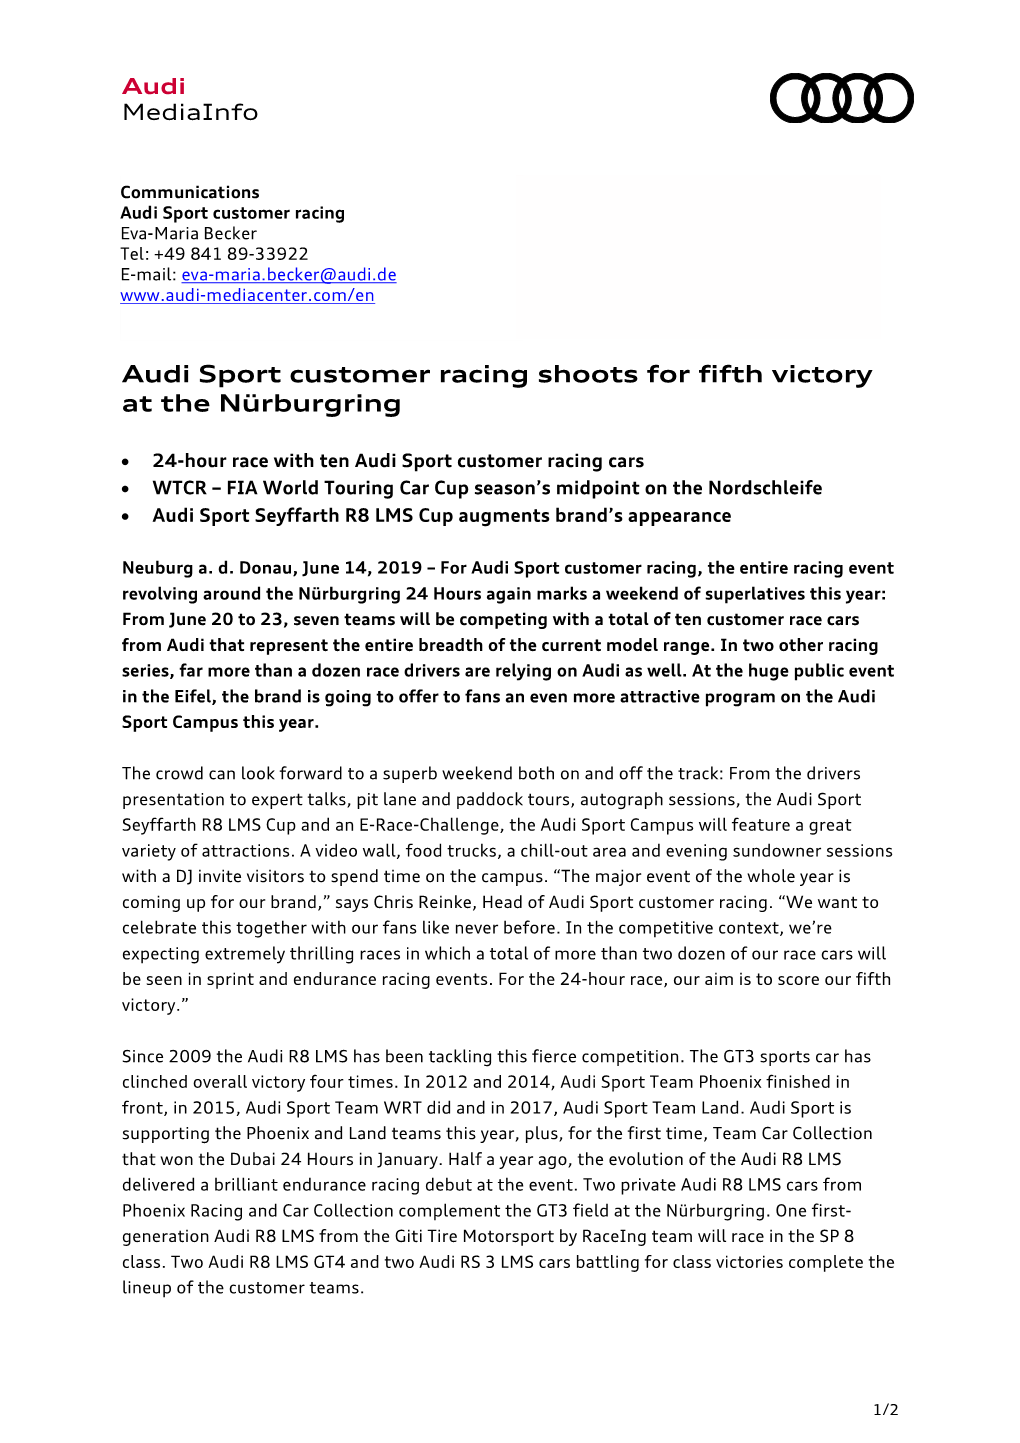 Audi Sport Customer Racing Shoots for Fifth Victory at the Nürburgring